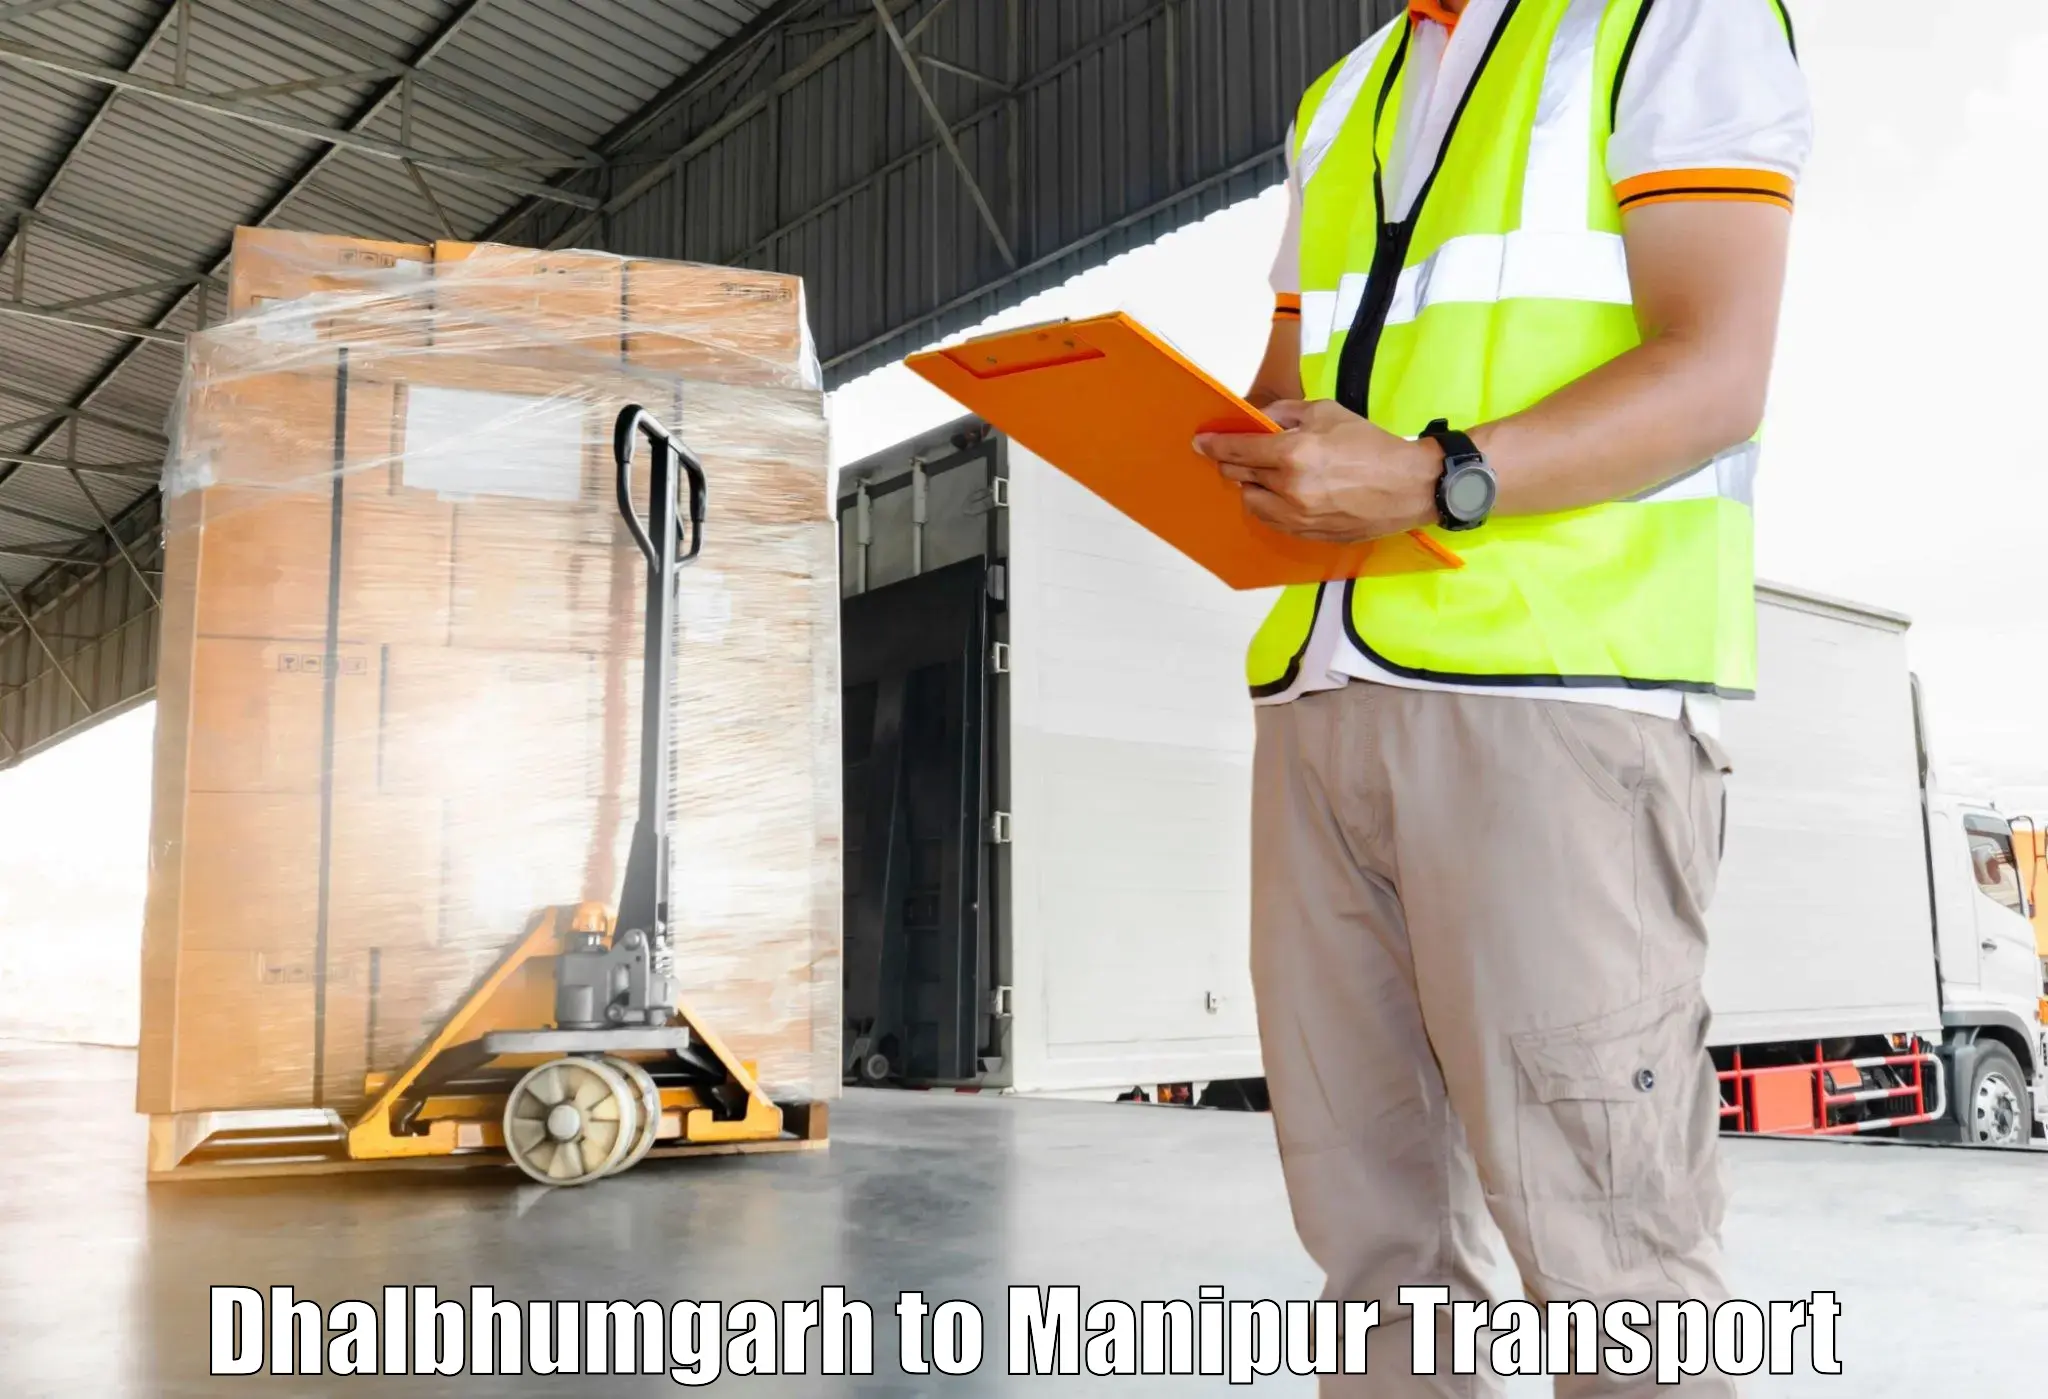 Two wheeler transport services Dhalbhumgarh to Manipur